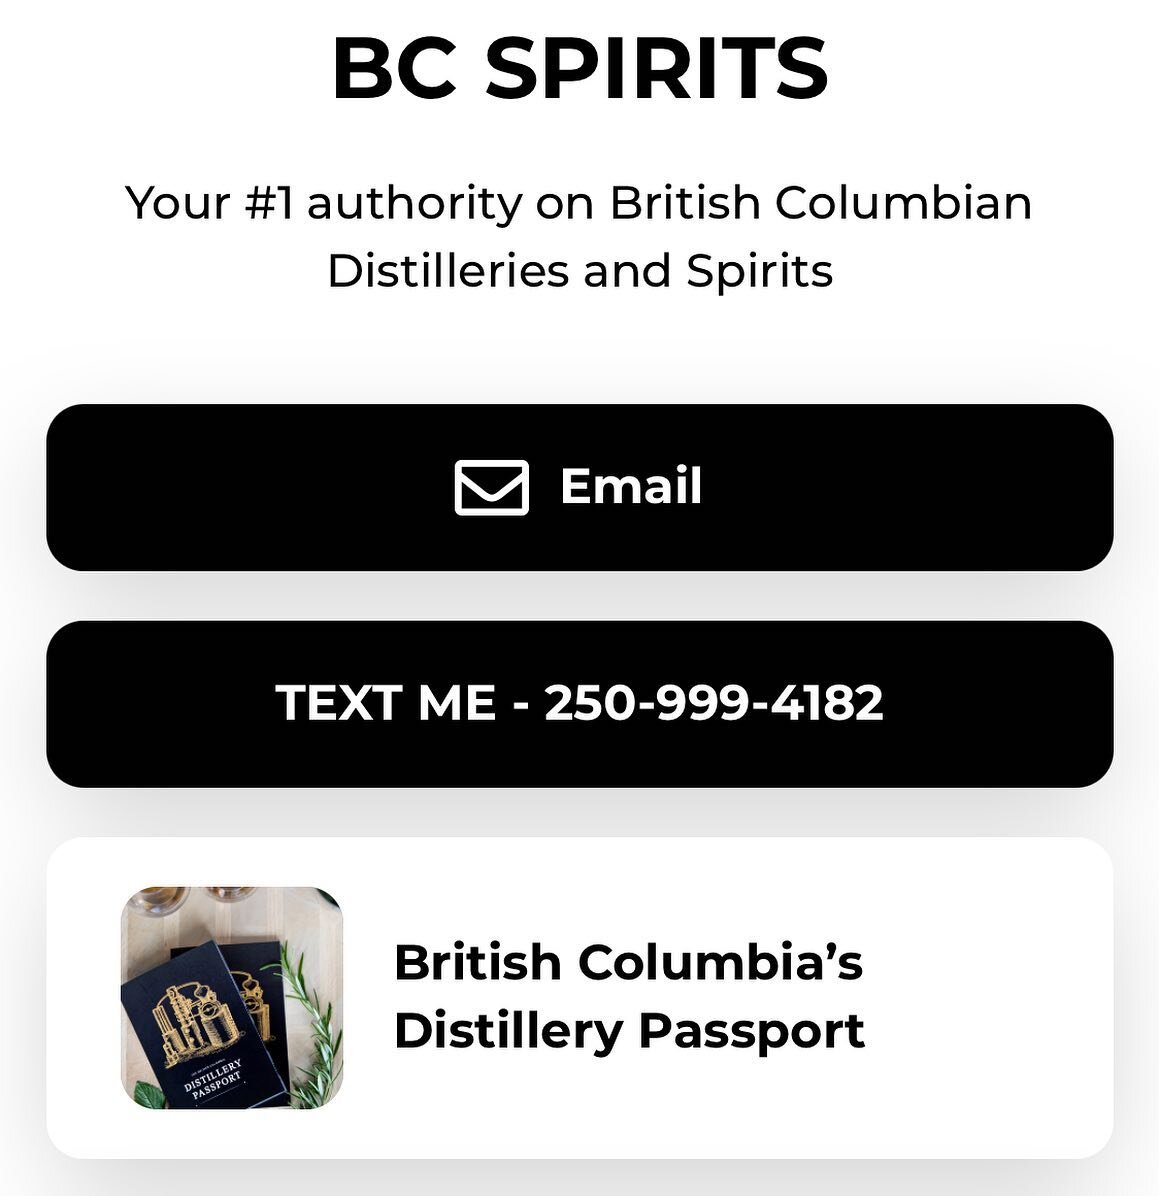 Early Bird Pricing for the BC Distillery Passport finishes tomorrow at 9am. Text the BC Spirits Community to get the code.